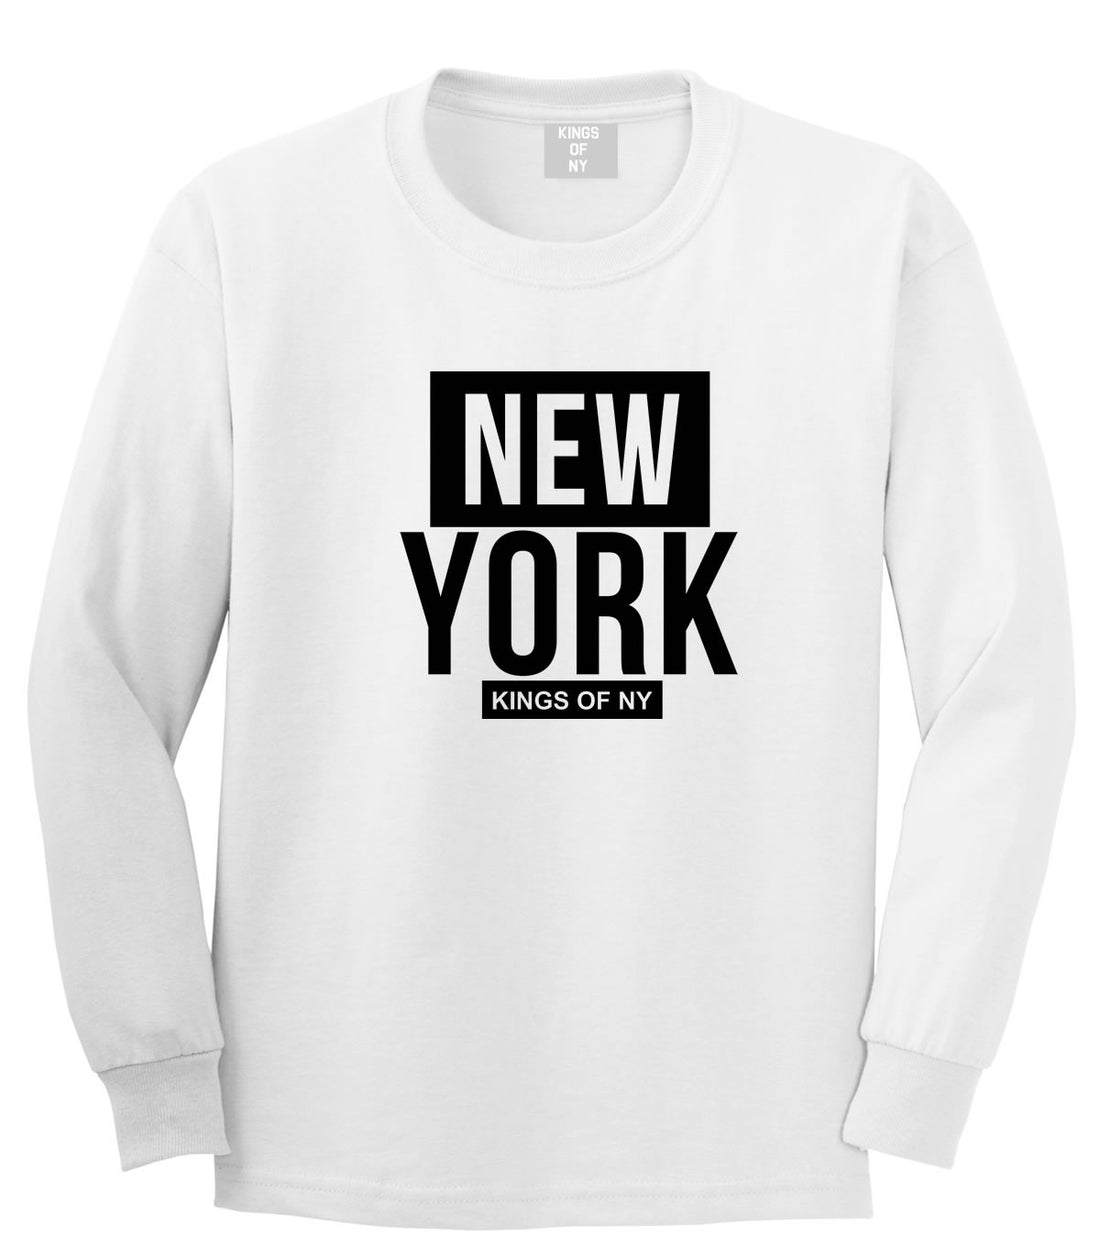 New York Block Box Long Sleeve T-Shirt in White by Kings Of NY